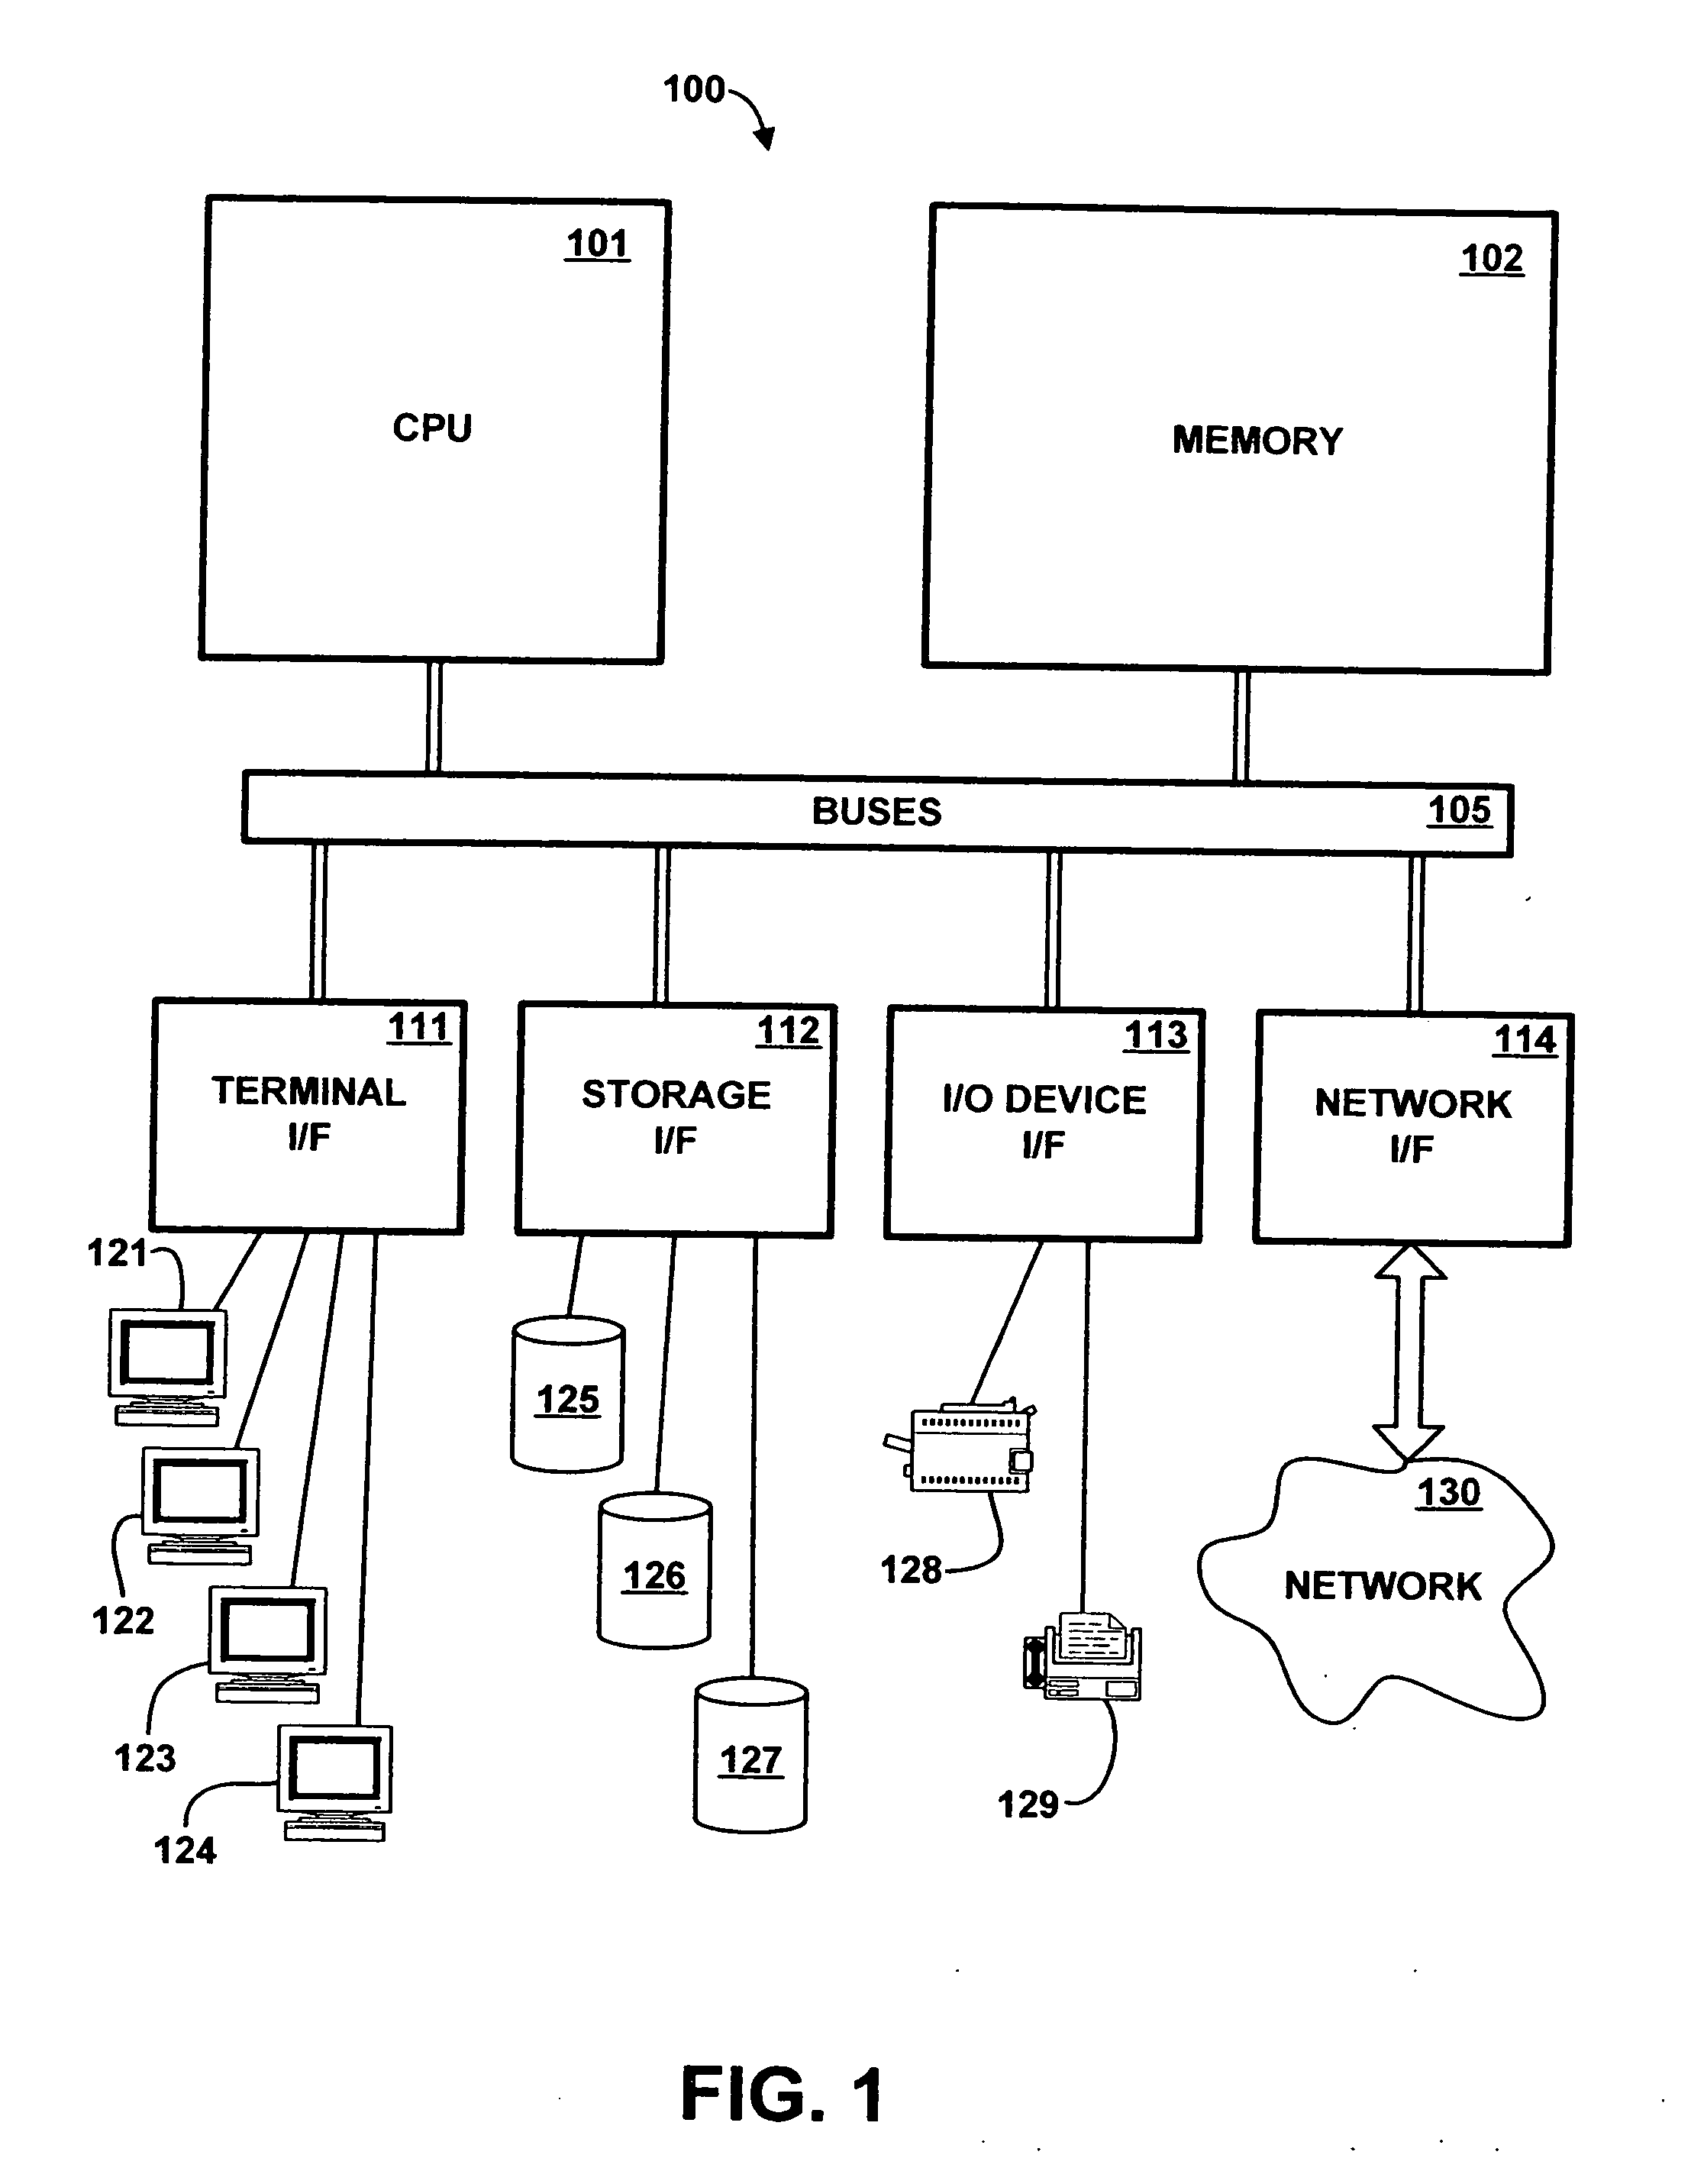 Method and apparatus for projecting the effect of maintaining an auxiliary database structure for use in executing database queries